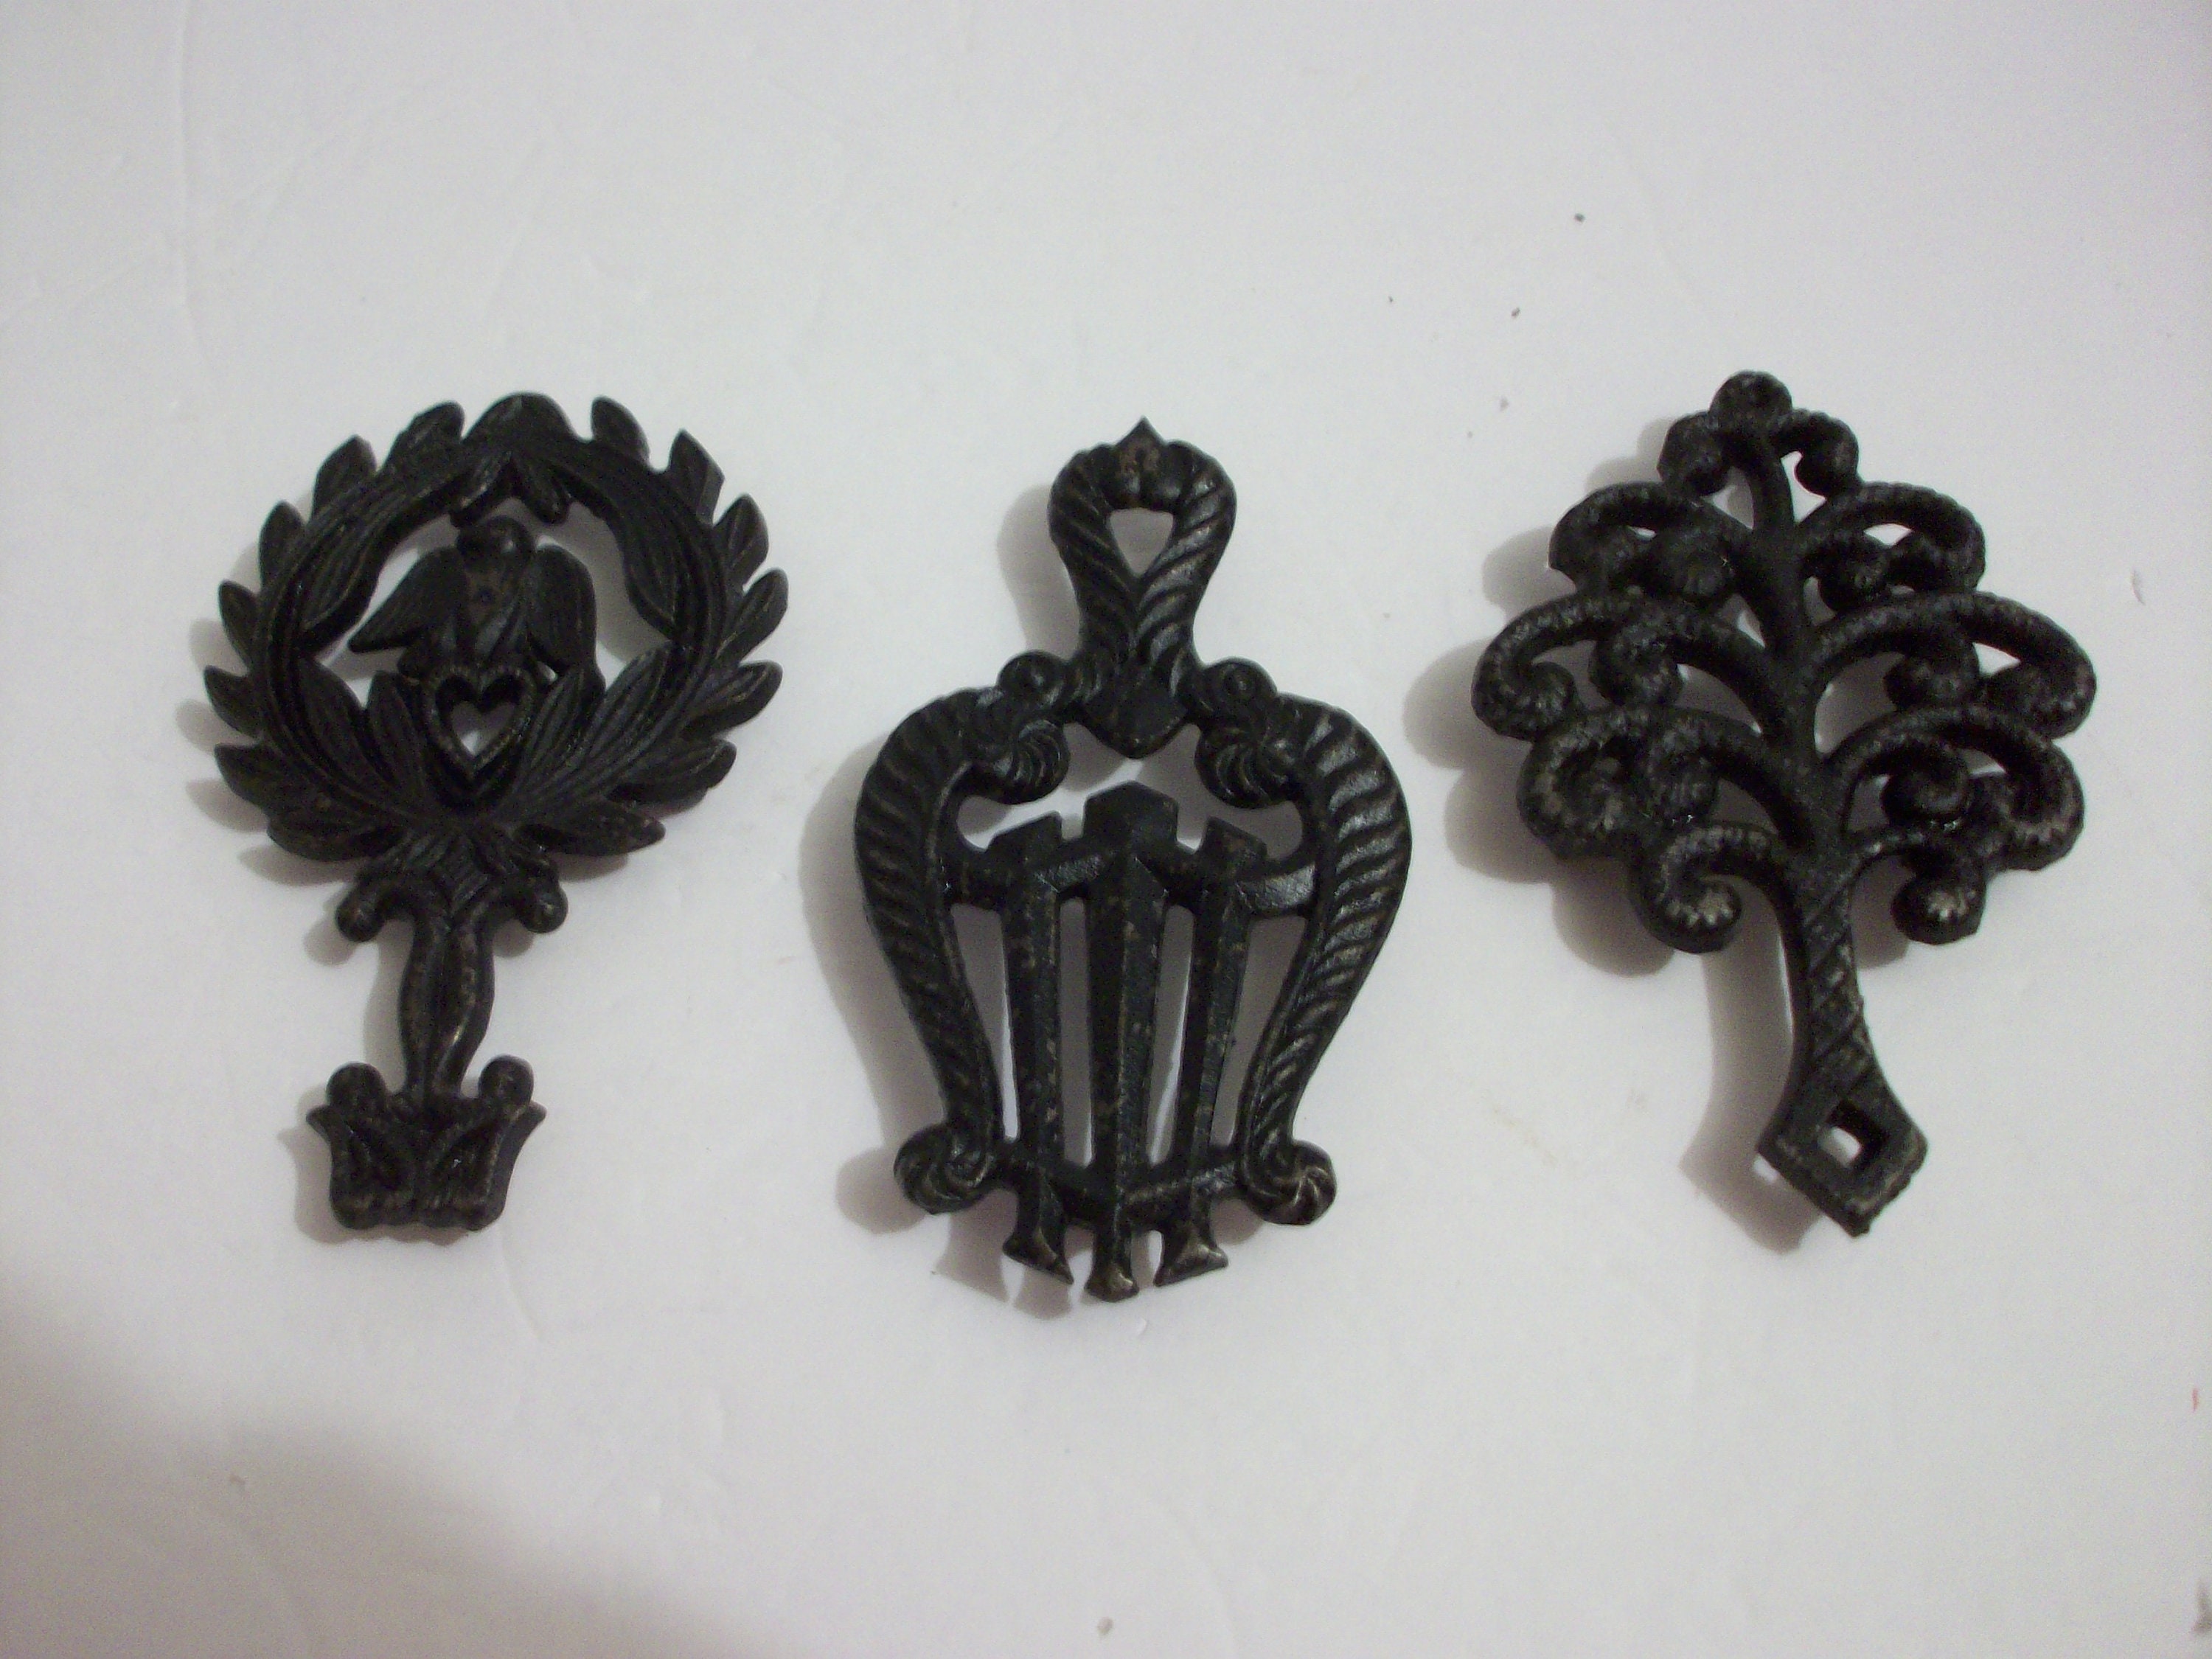 Lodge Cast Iron on X: We made these cast iron trivets in the